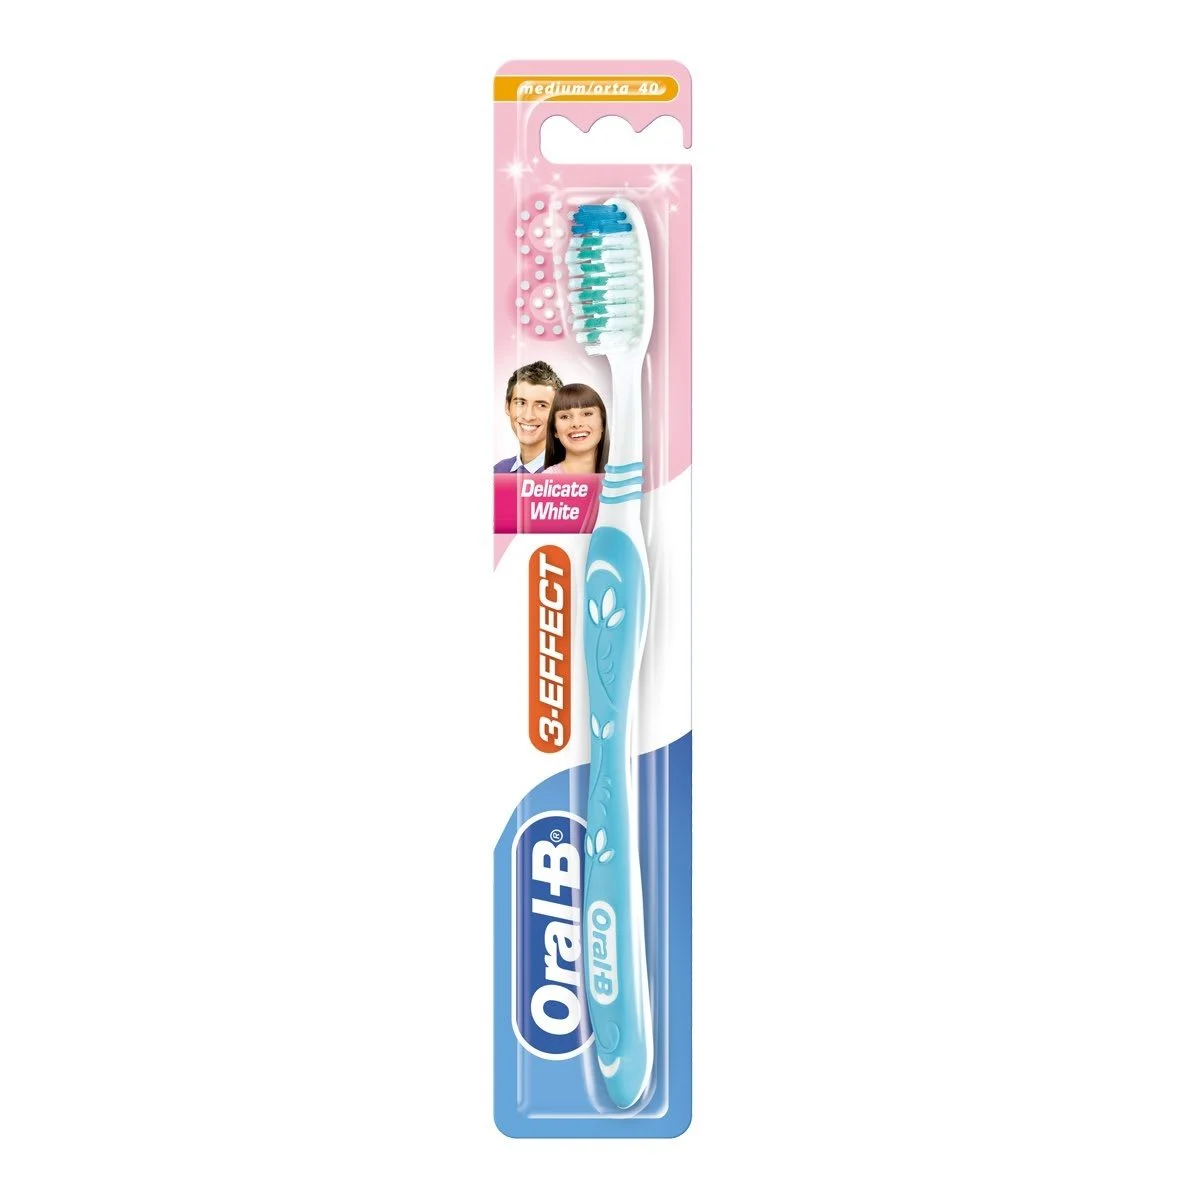 Oral-B 3 Effect Delicate White toothbrush 